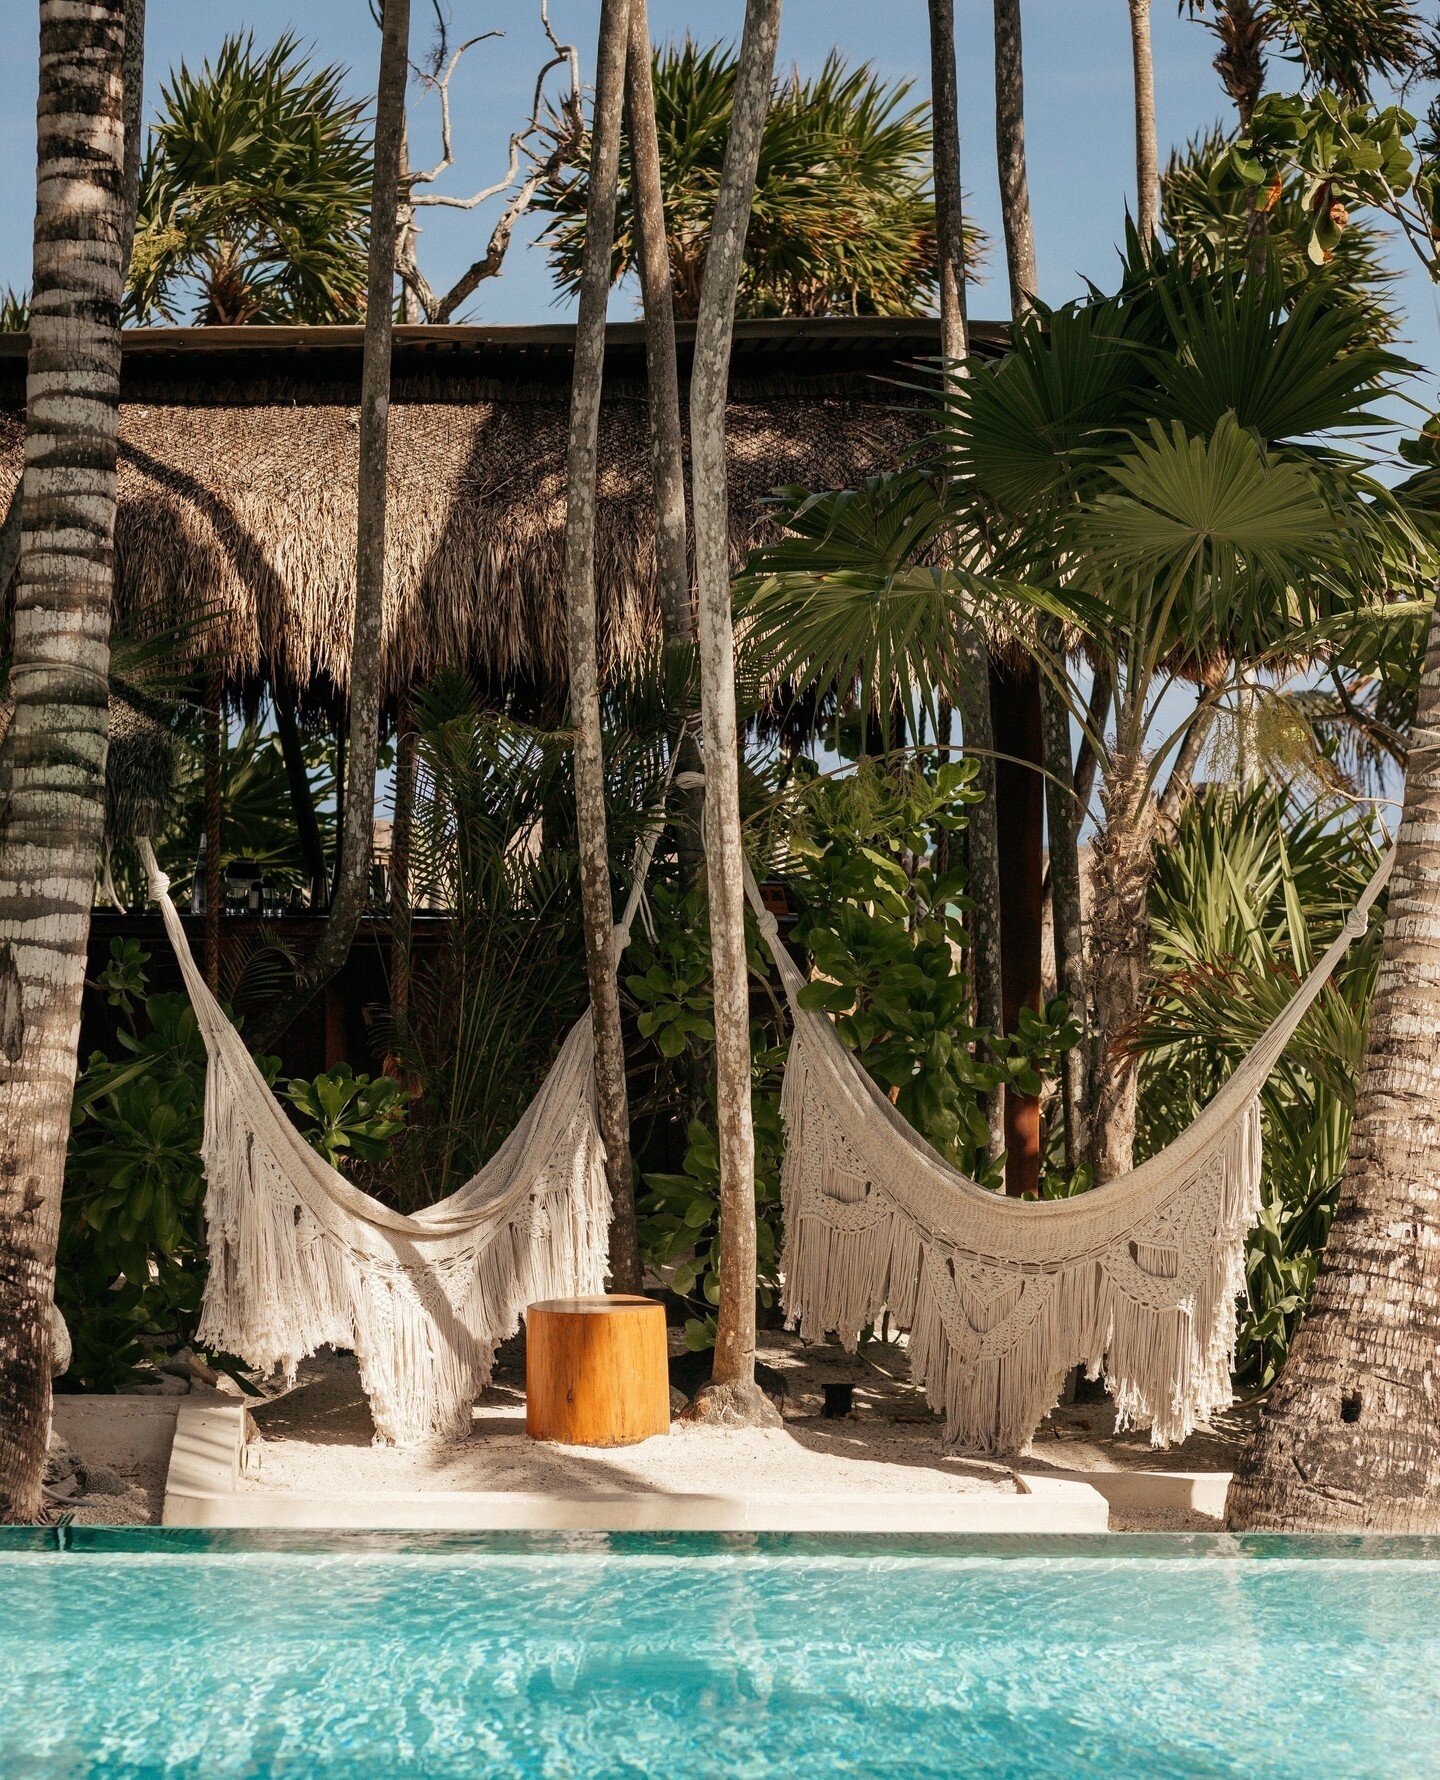 Known as the &lsquo;city of dawn&rsquo;, as the town faces the sunrise, Tulum draws wellness enthusiasts to it&rsquo;s bohemian shores. ⁠
⁠
Representing the ultimate experience in tropical living, Jashita Tulum Luxury Villas (@jashitatulumluxuryvilla